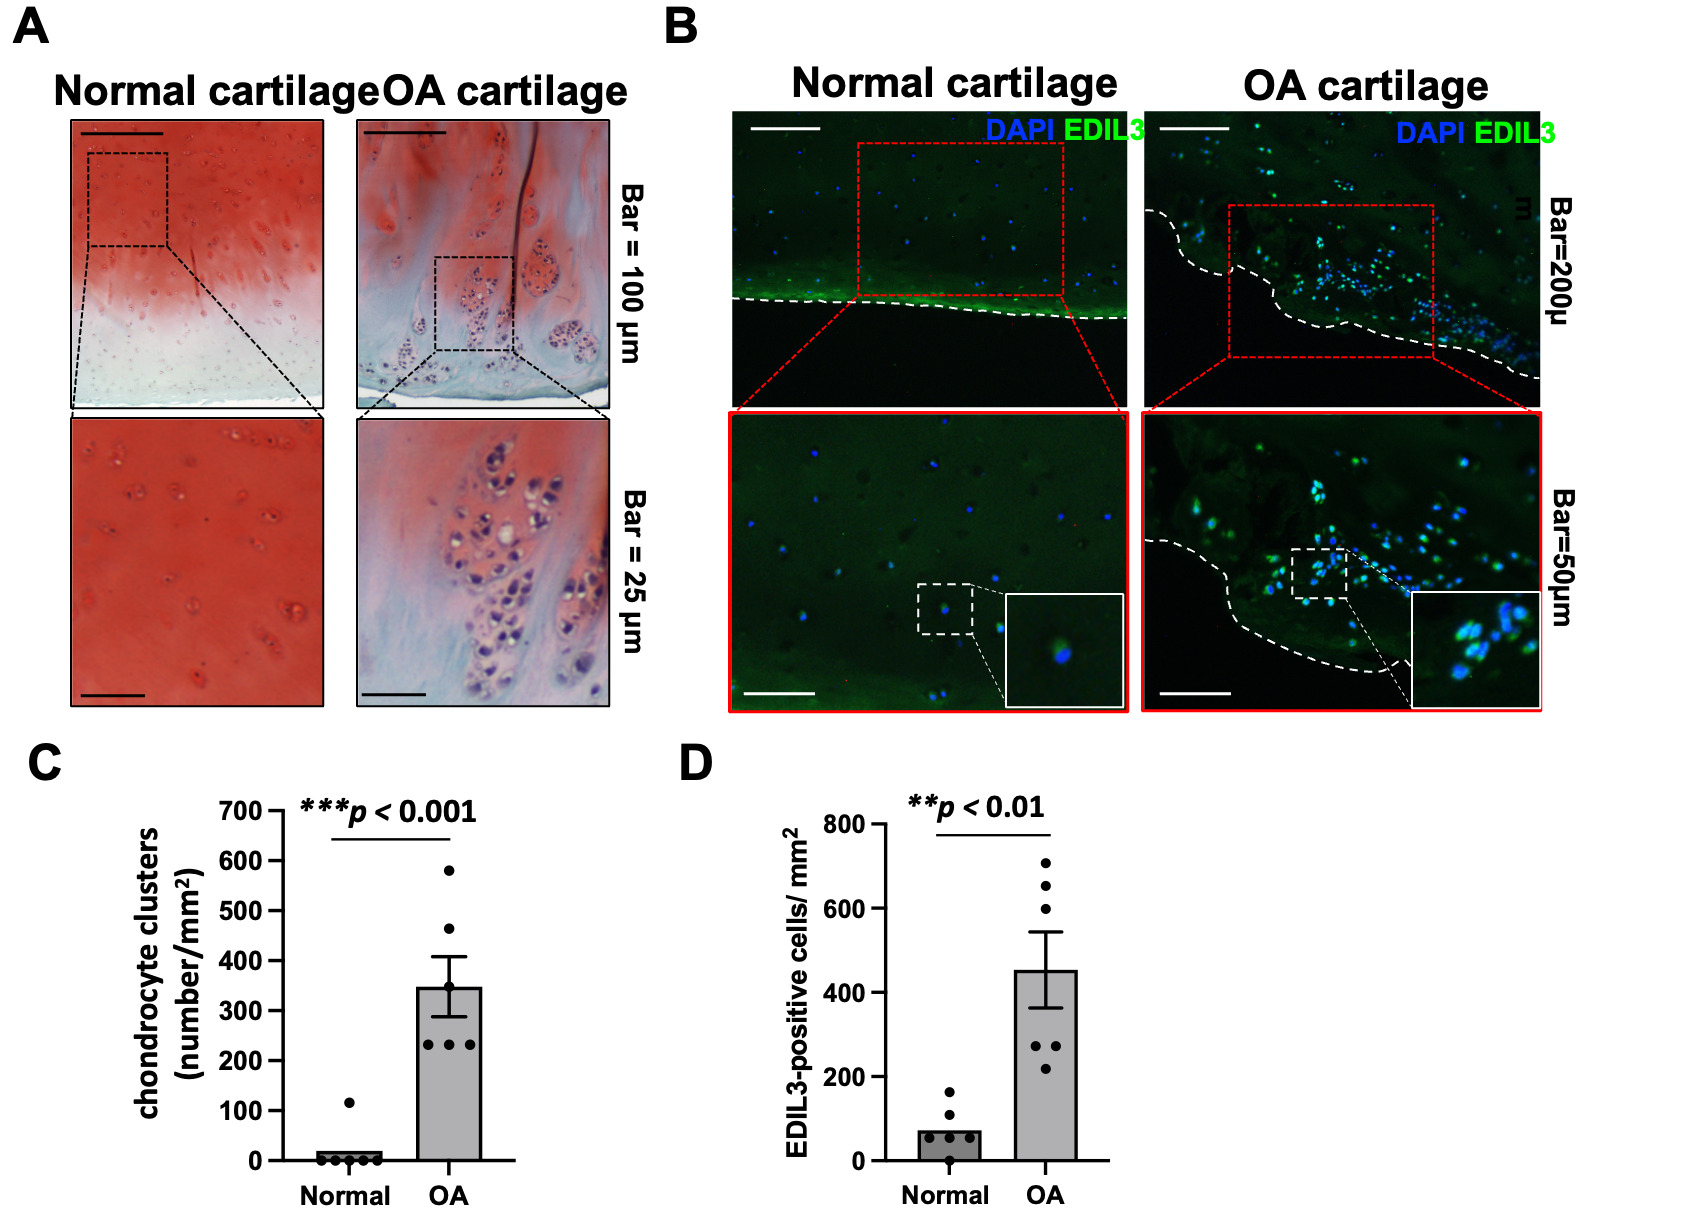 Fig. 1 
            The expression of EGF-like repeats and discoidin I-like domains-containing protein 3 (EDIL3) is higher in human osteoarthritis (OA) cartilage compared with normal cartilage. Paraffin tissue sections were established from both pathological and normal cartilage. Safranin O and immunofluorescence staining were performed for the human articular cartilage sections. a) and b) Compared with normal cartilage, OA cartilage demonstrated chondrocyte cell clustering, empty lacunae morphology, and increased EDIL3 fluorescence signal. c) and d) The chondrocyte cluster and EDIL3-positive cells in the articular cartilage were quantified. Data are presented as means and standard errors. **p < 0.05, ***p < 0.001; independent-samples t-test. DAPI, 4′,6-diamidino-2-phenylindole.
          